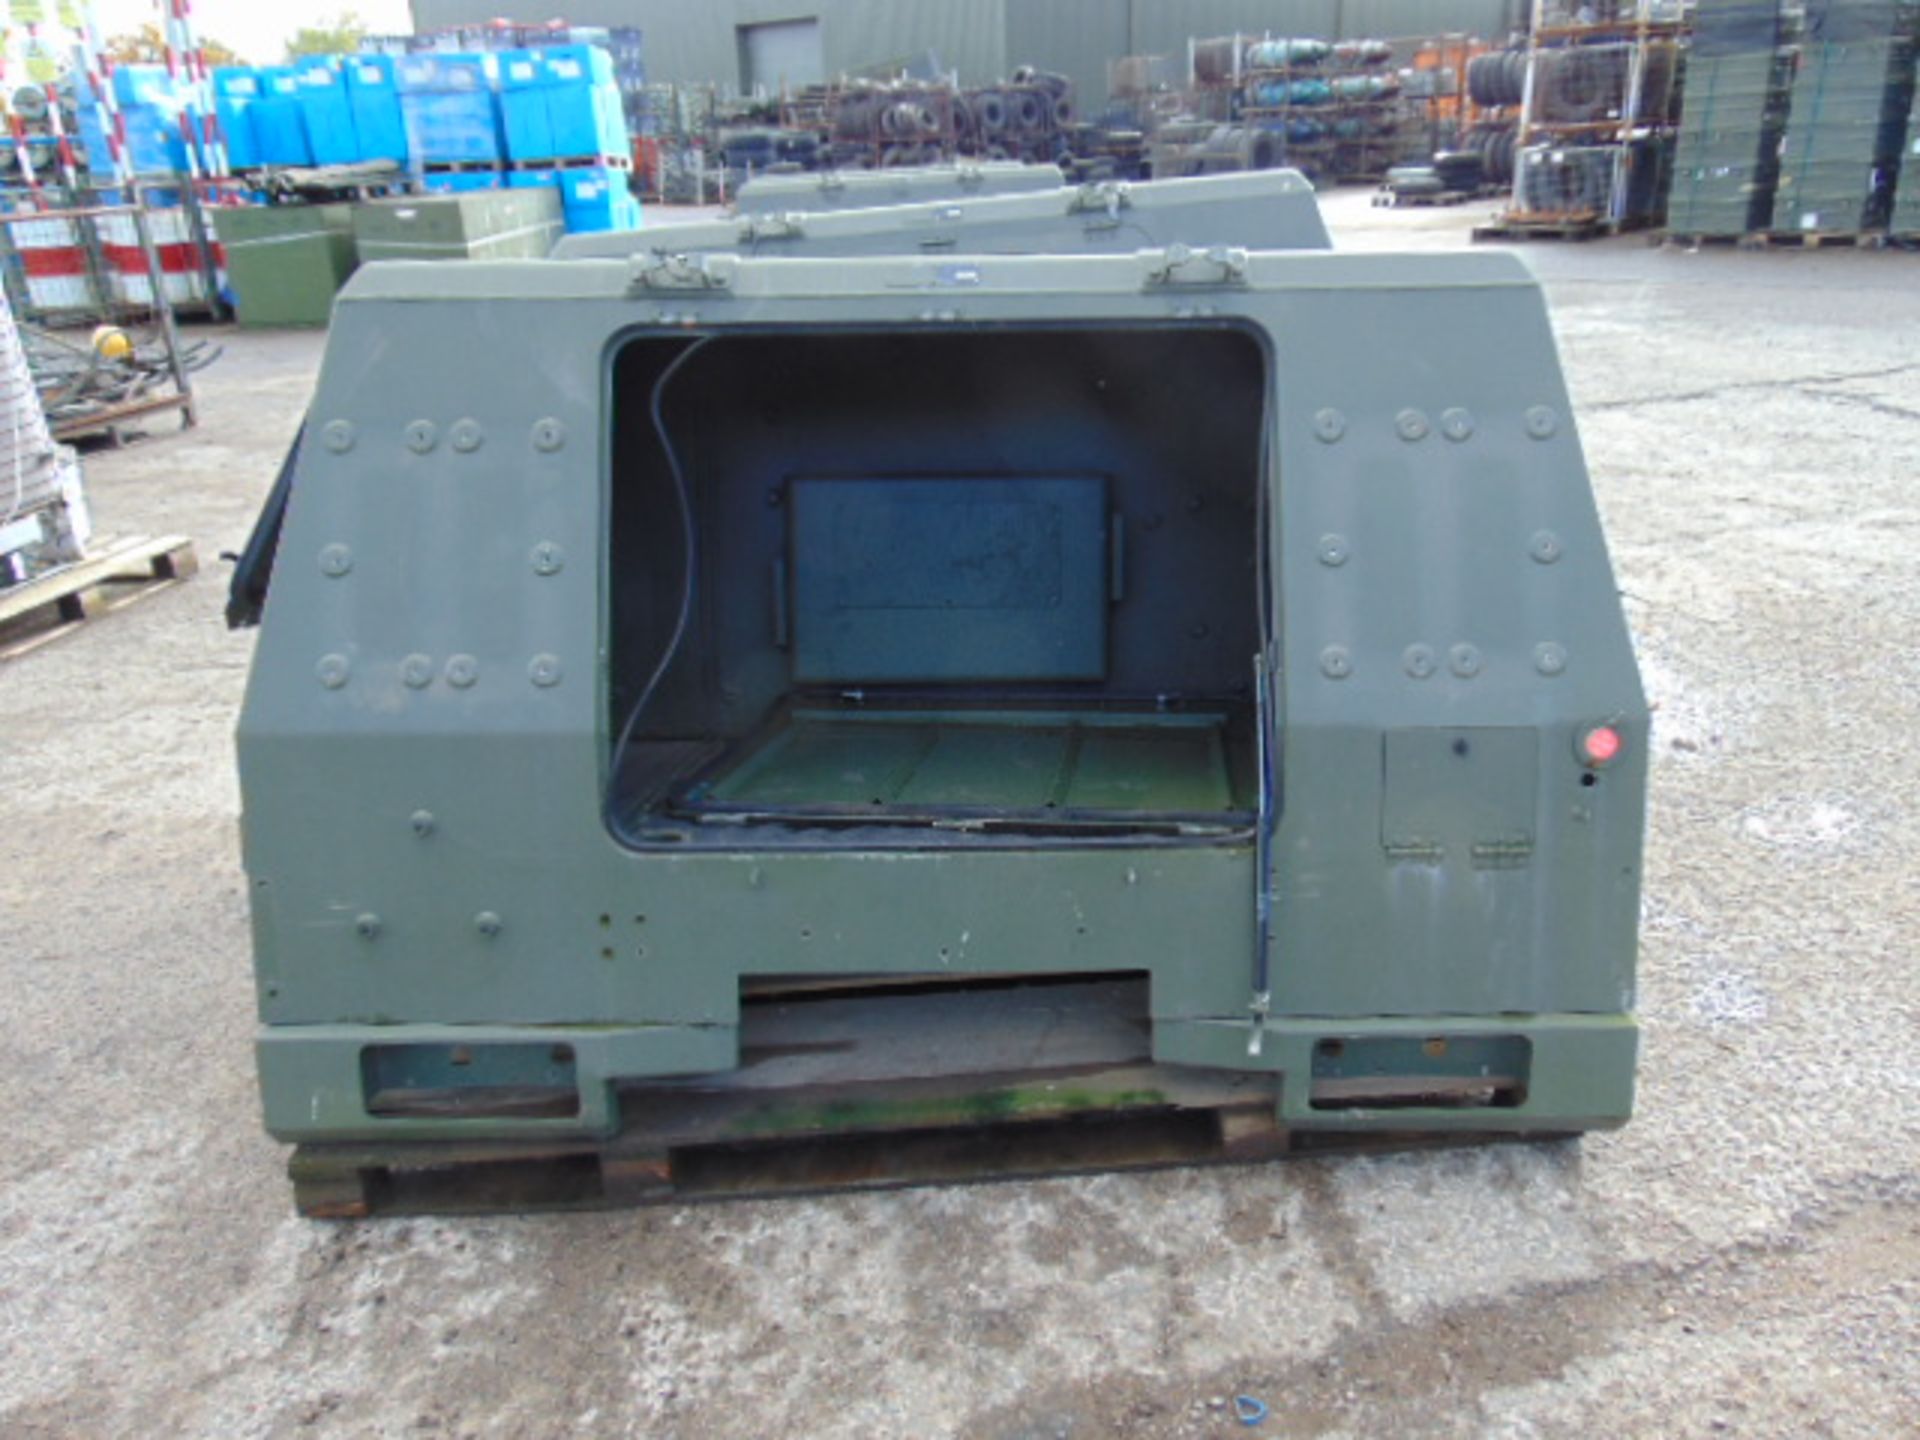 2 x Aluminium Rear Pod Assembly for Panther Command Vehicles - Image 3 of 4